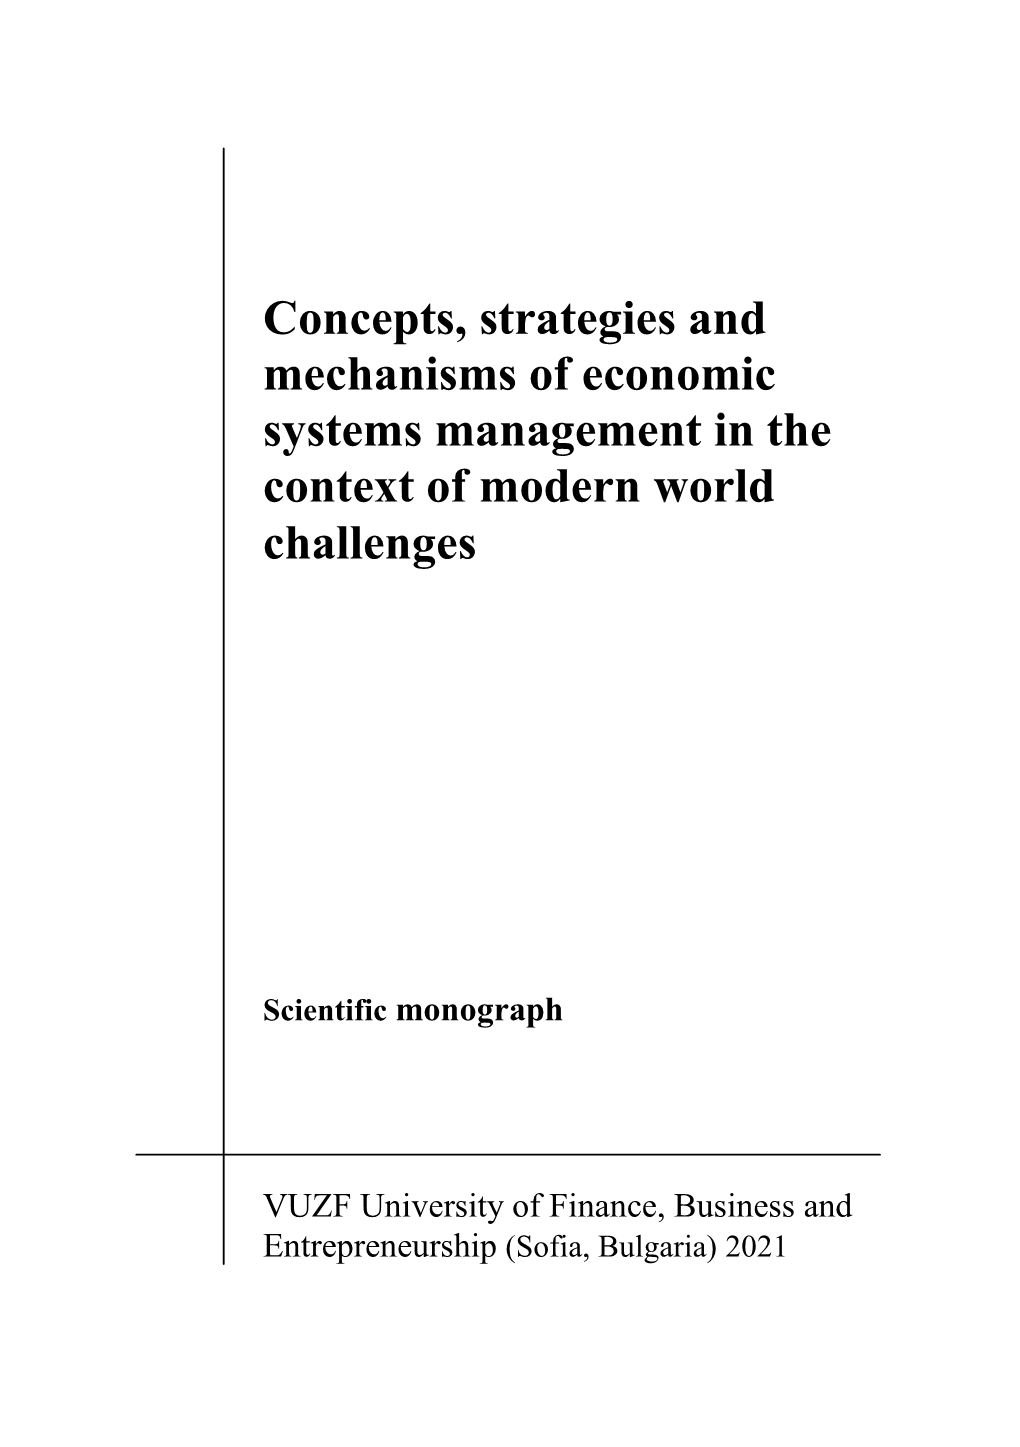 Concepts, Strategies and Mechanisms of Economic Systems Management in the Context of Modern World Challenges